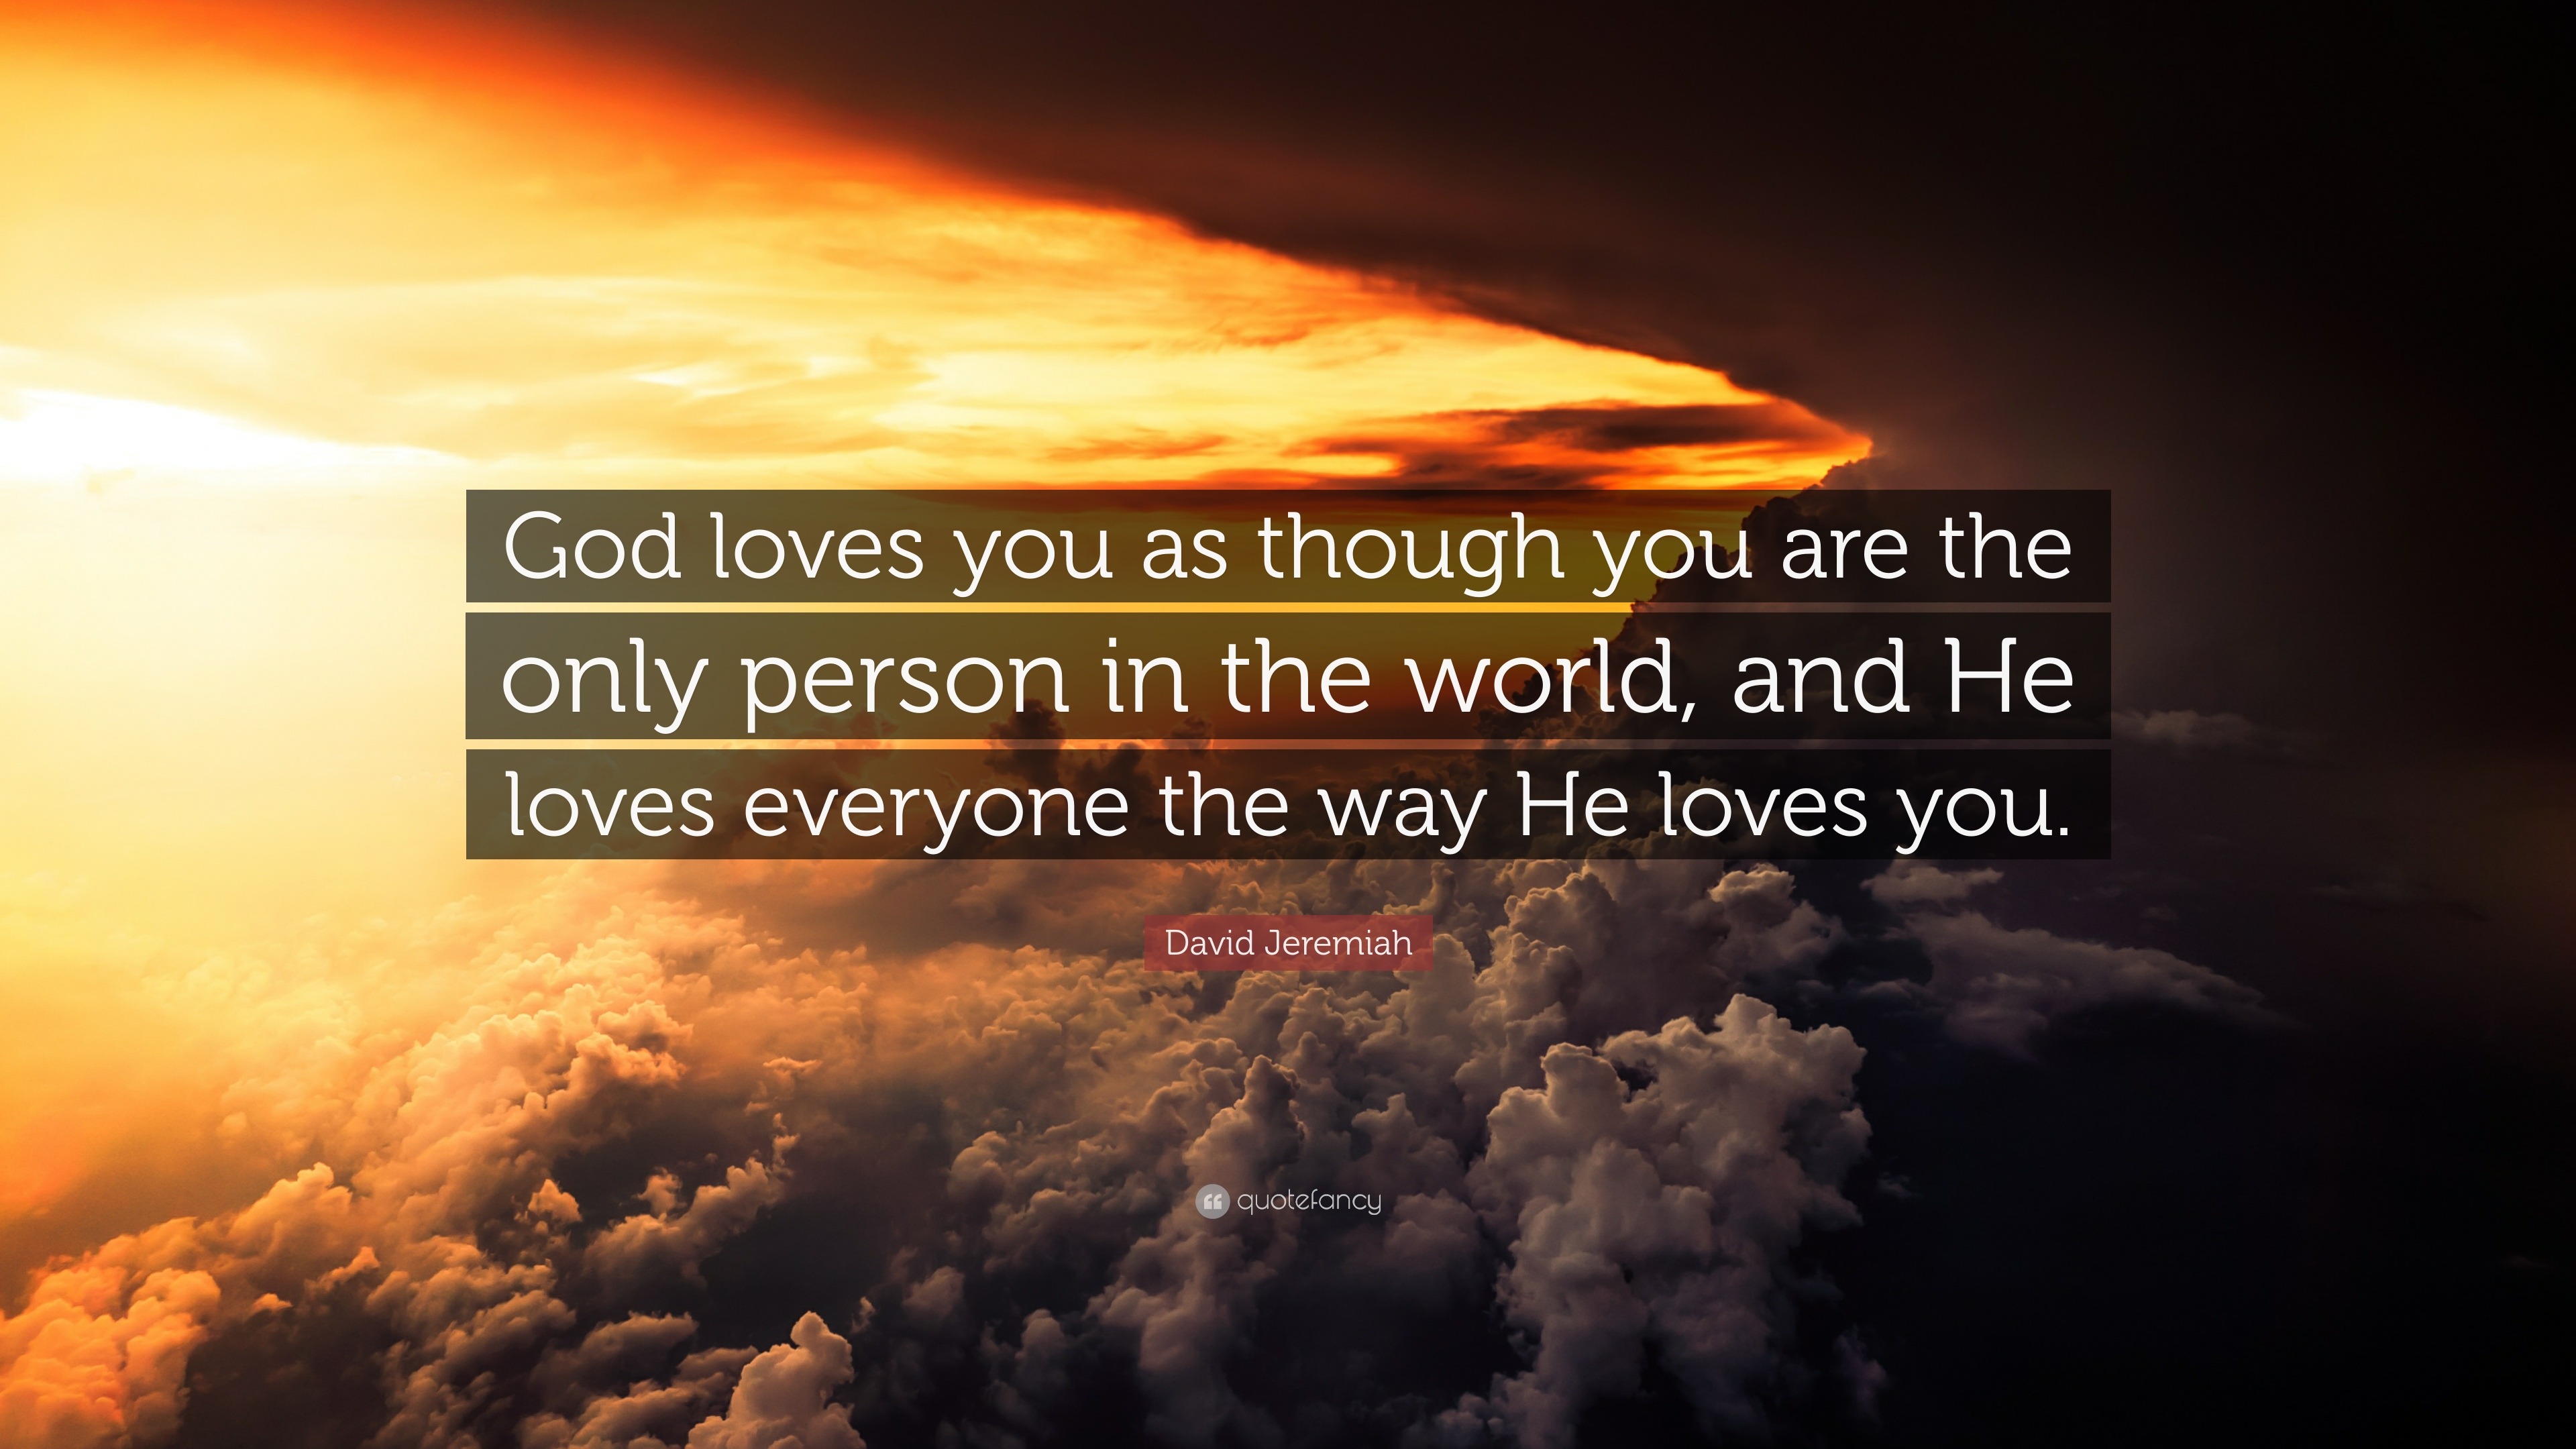 David Jeremiah Quote “God loves you as though you are the